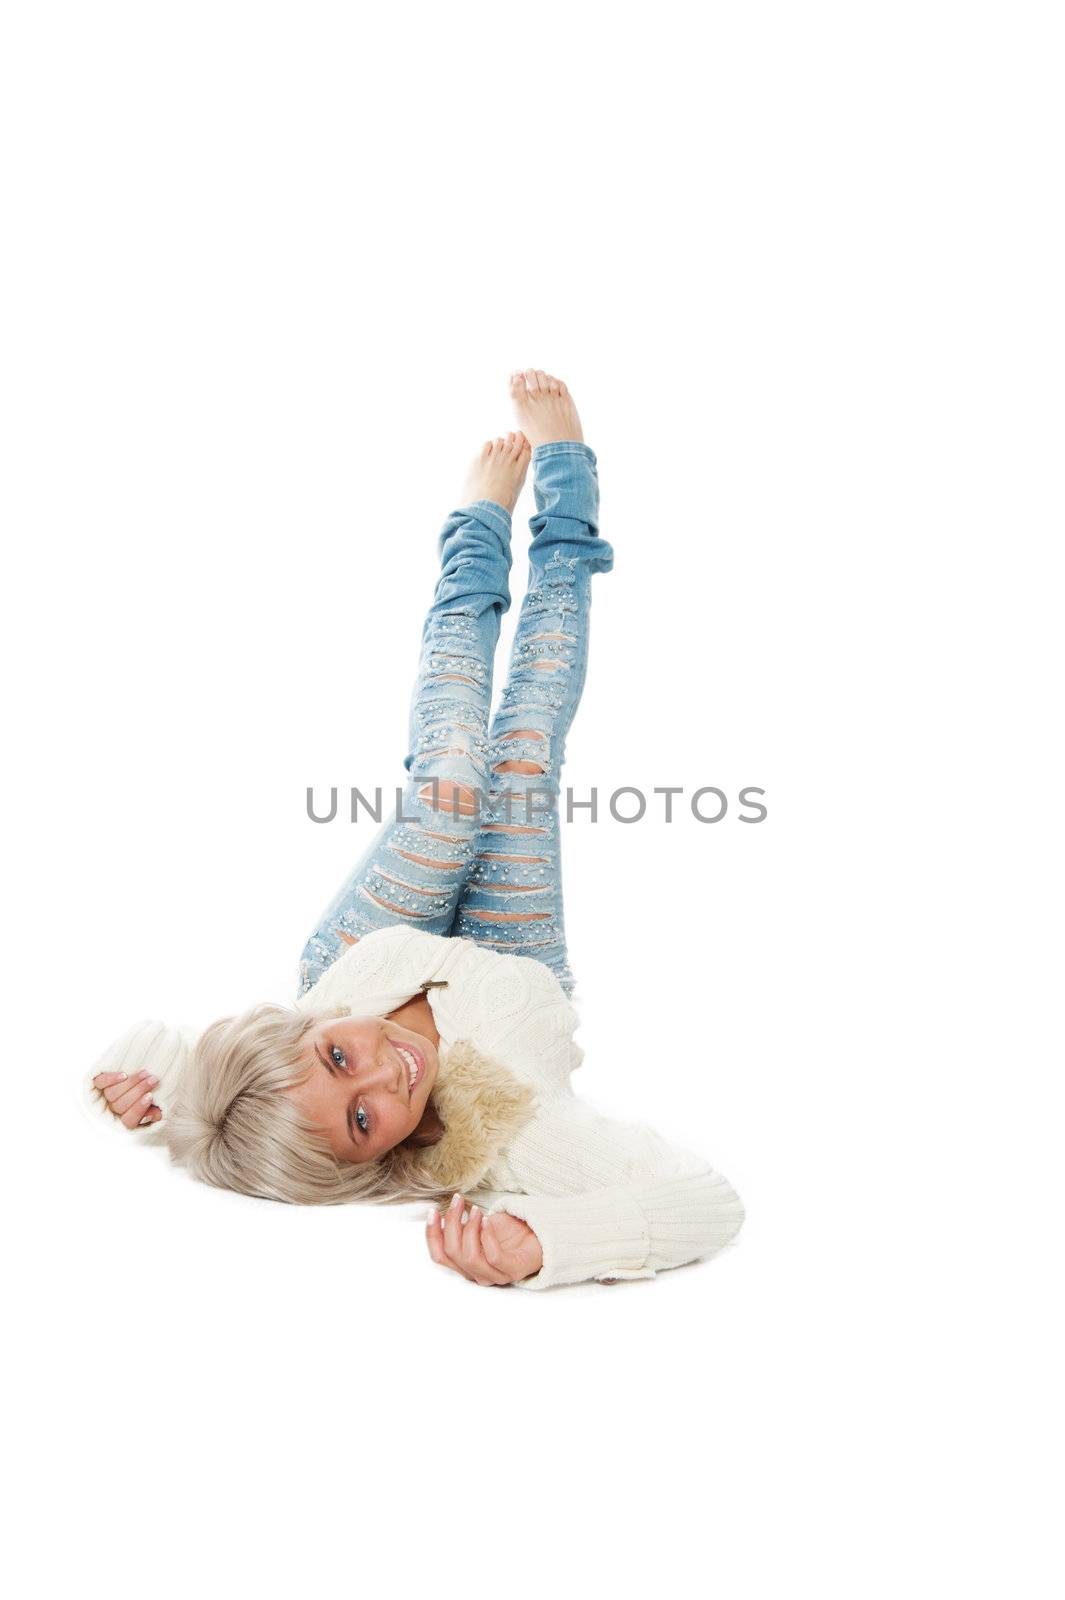 teenager lying on the floor with your feet raised by raduga21